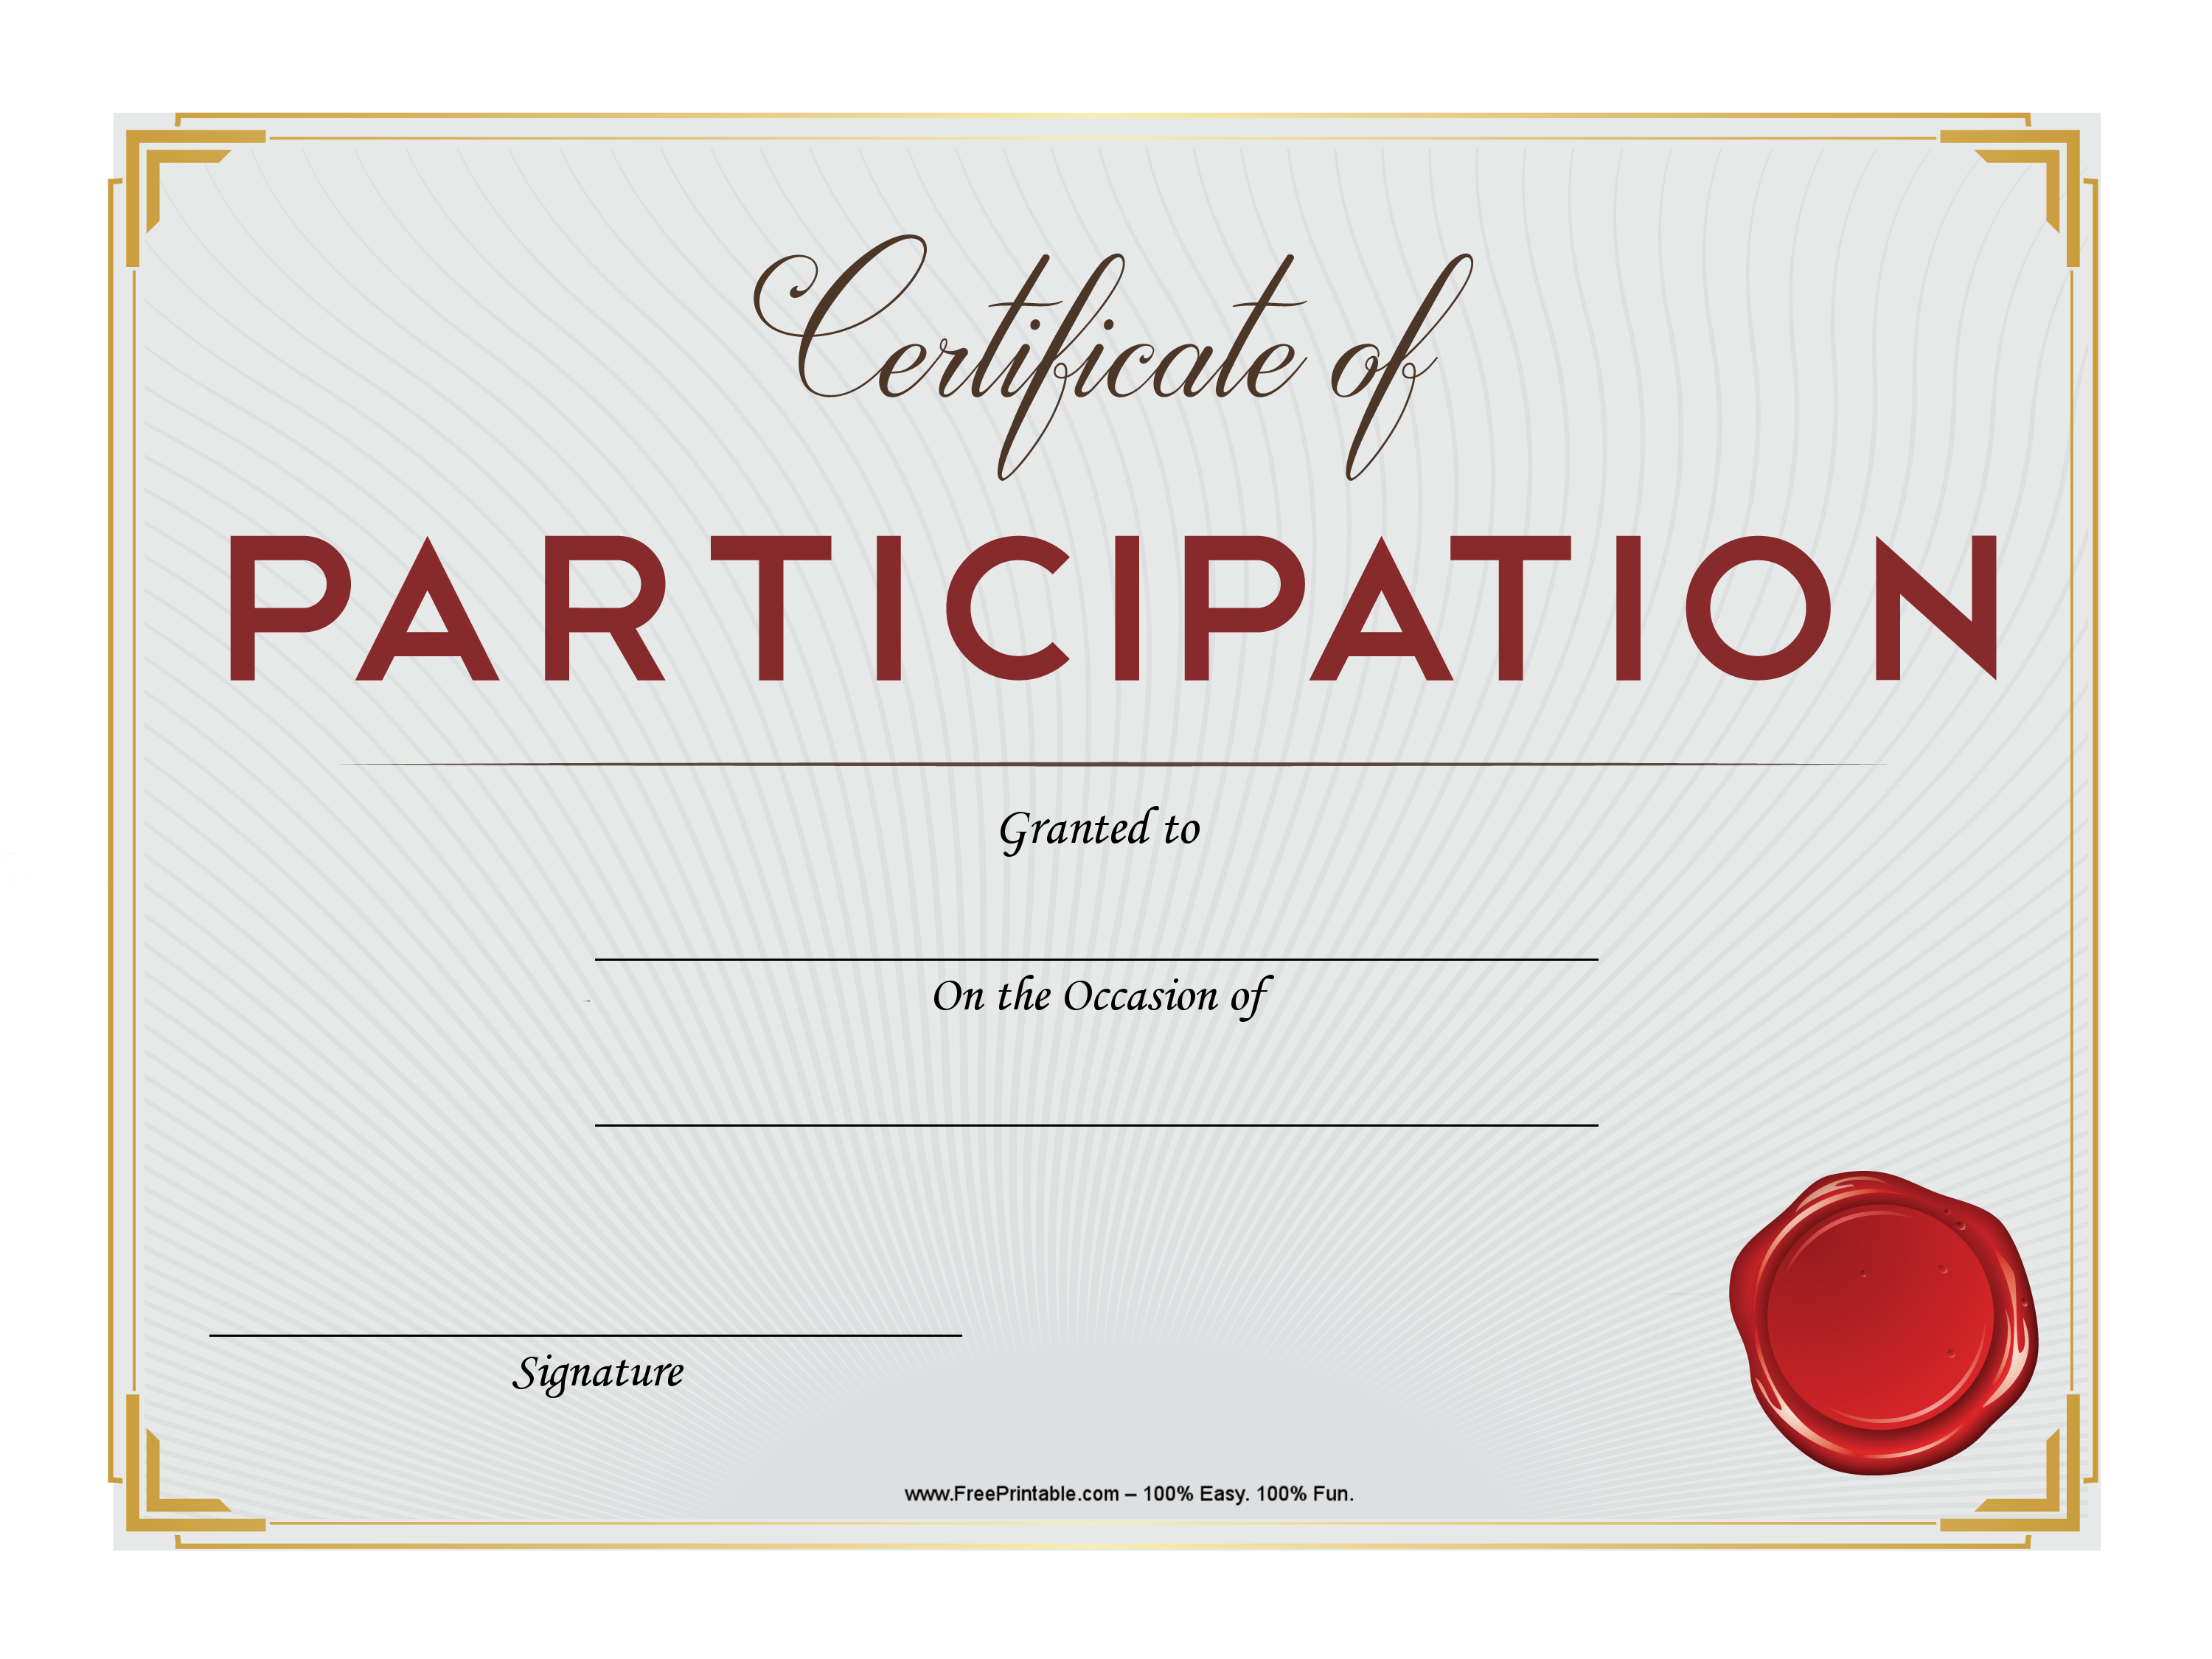 Customize Your Free Printable Participation Certificate with Red Seal